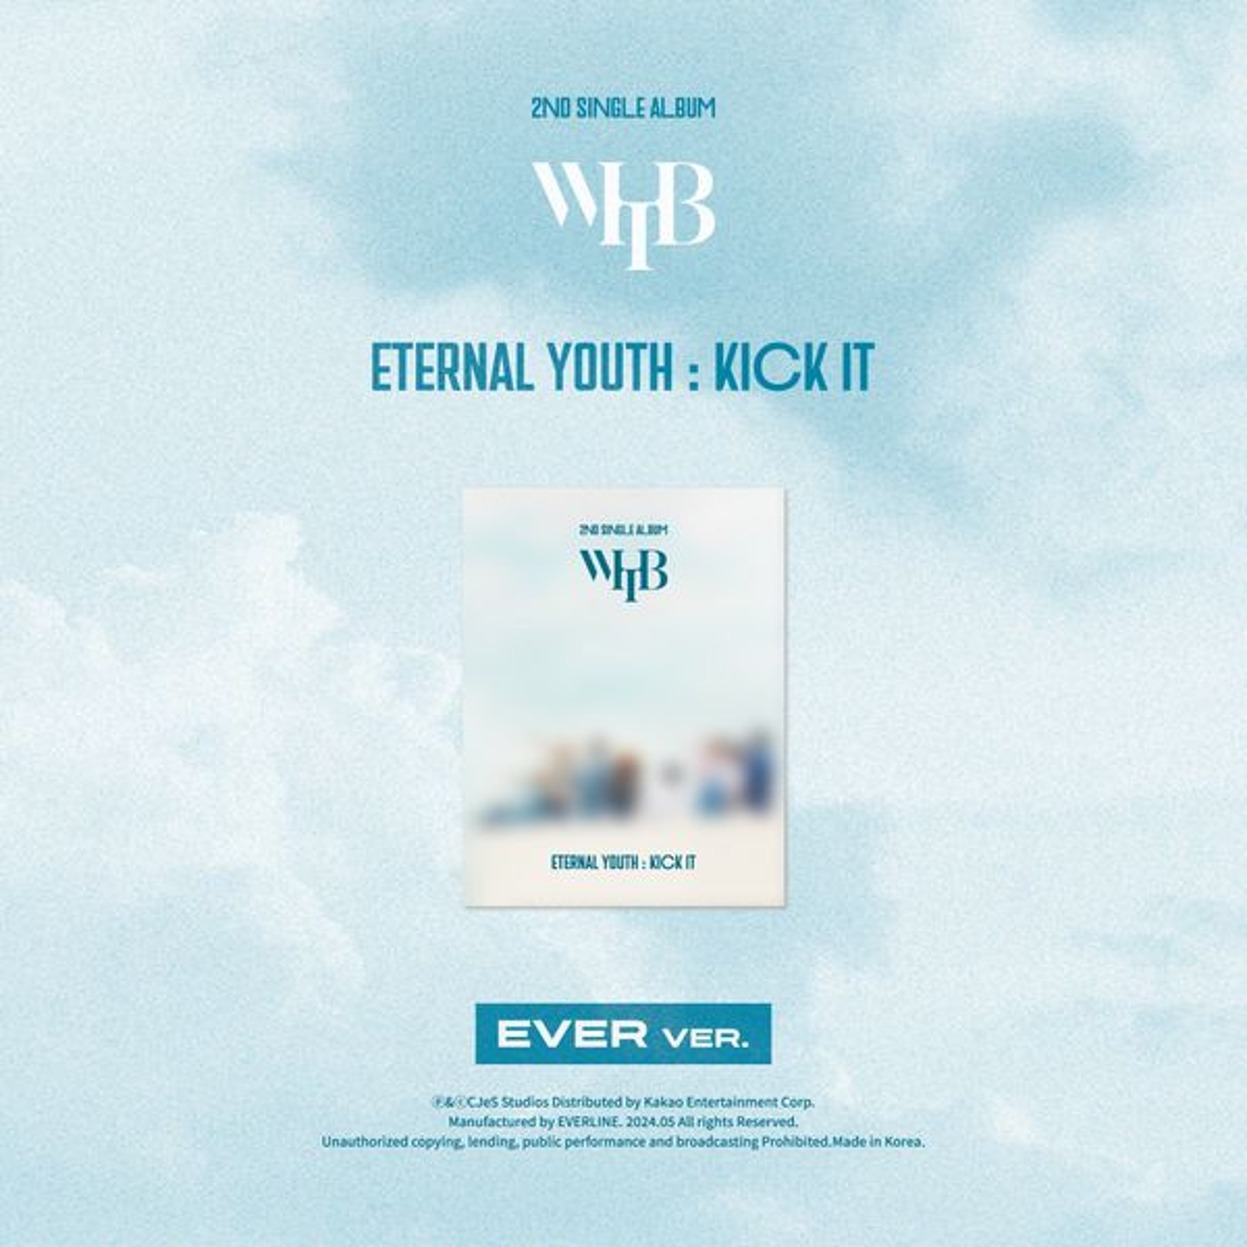 WHIB - 2nd single album [ETERNAL YOUTH : KICK IT] (EVER VER.)